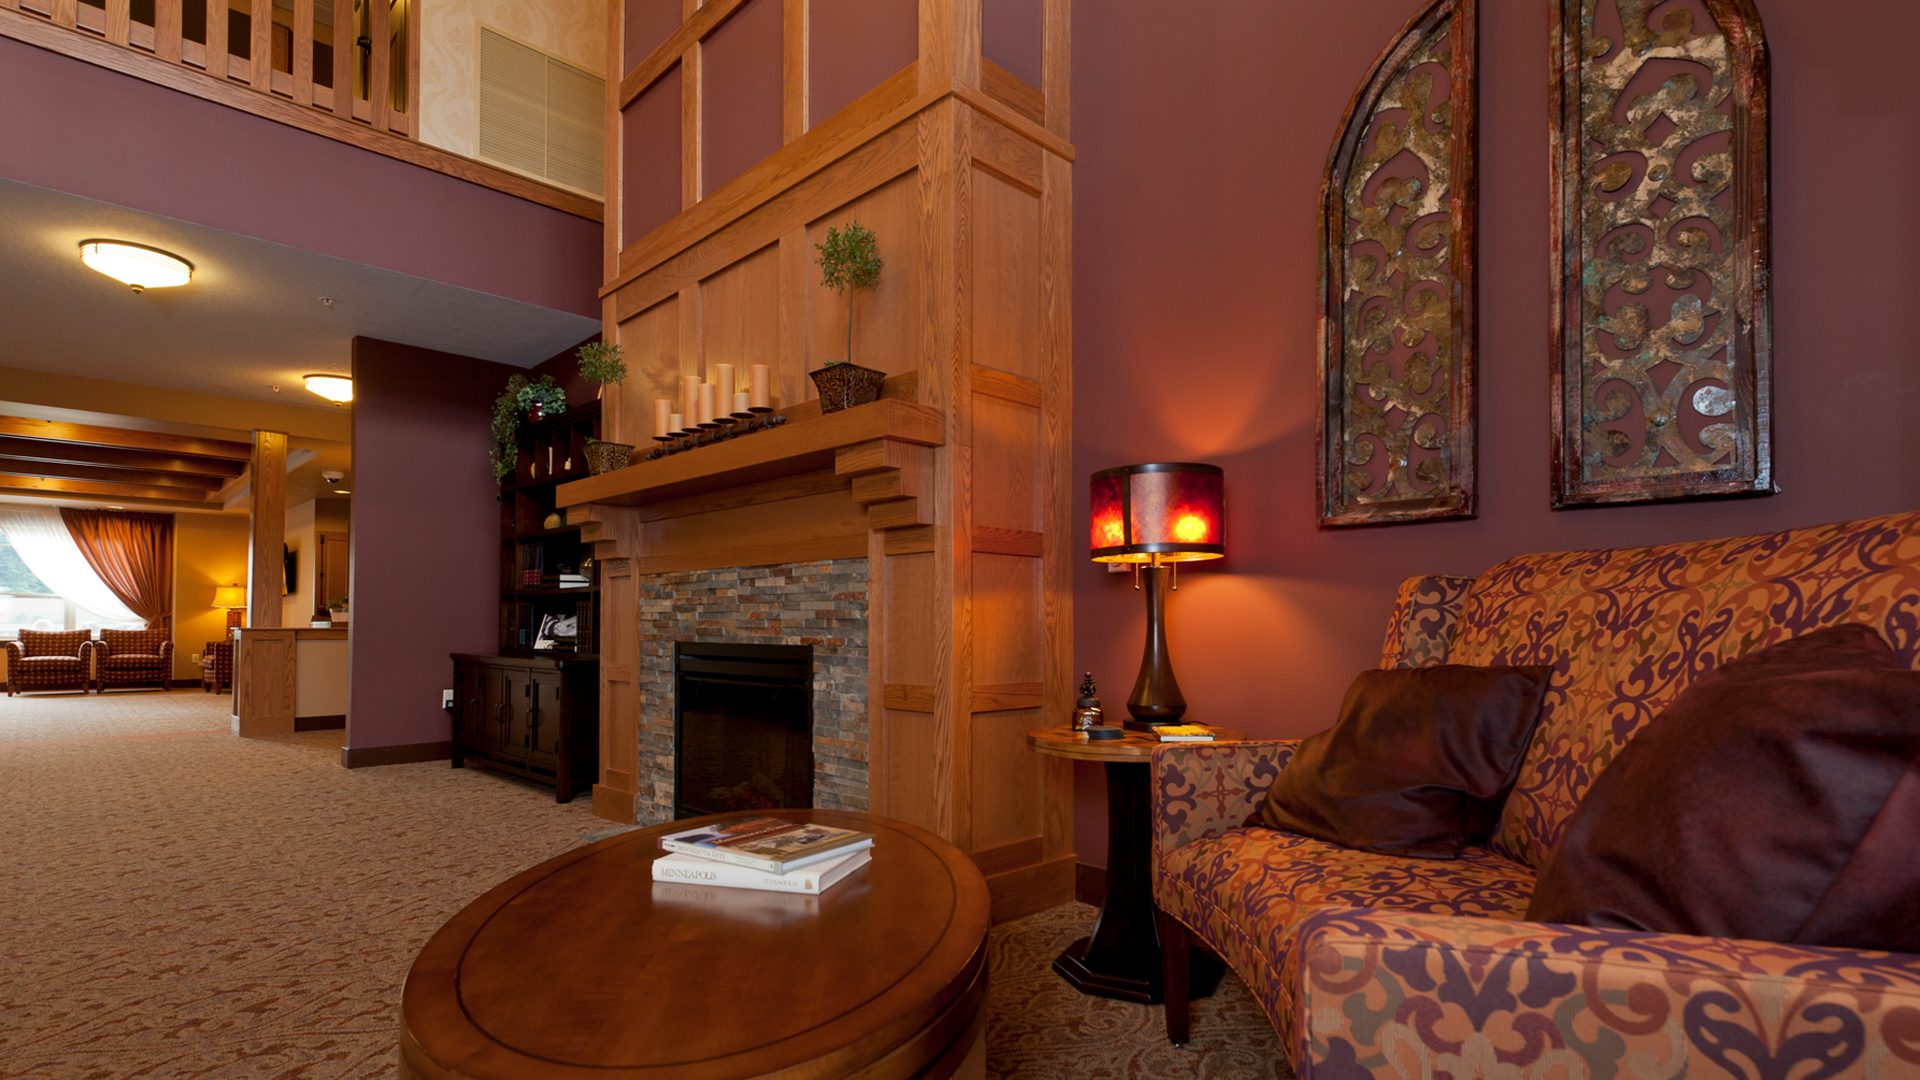 Trails of Orono Senior Housing Orono MN Entrance Lobby with Seating by Fireplace